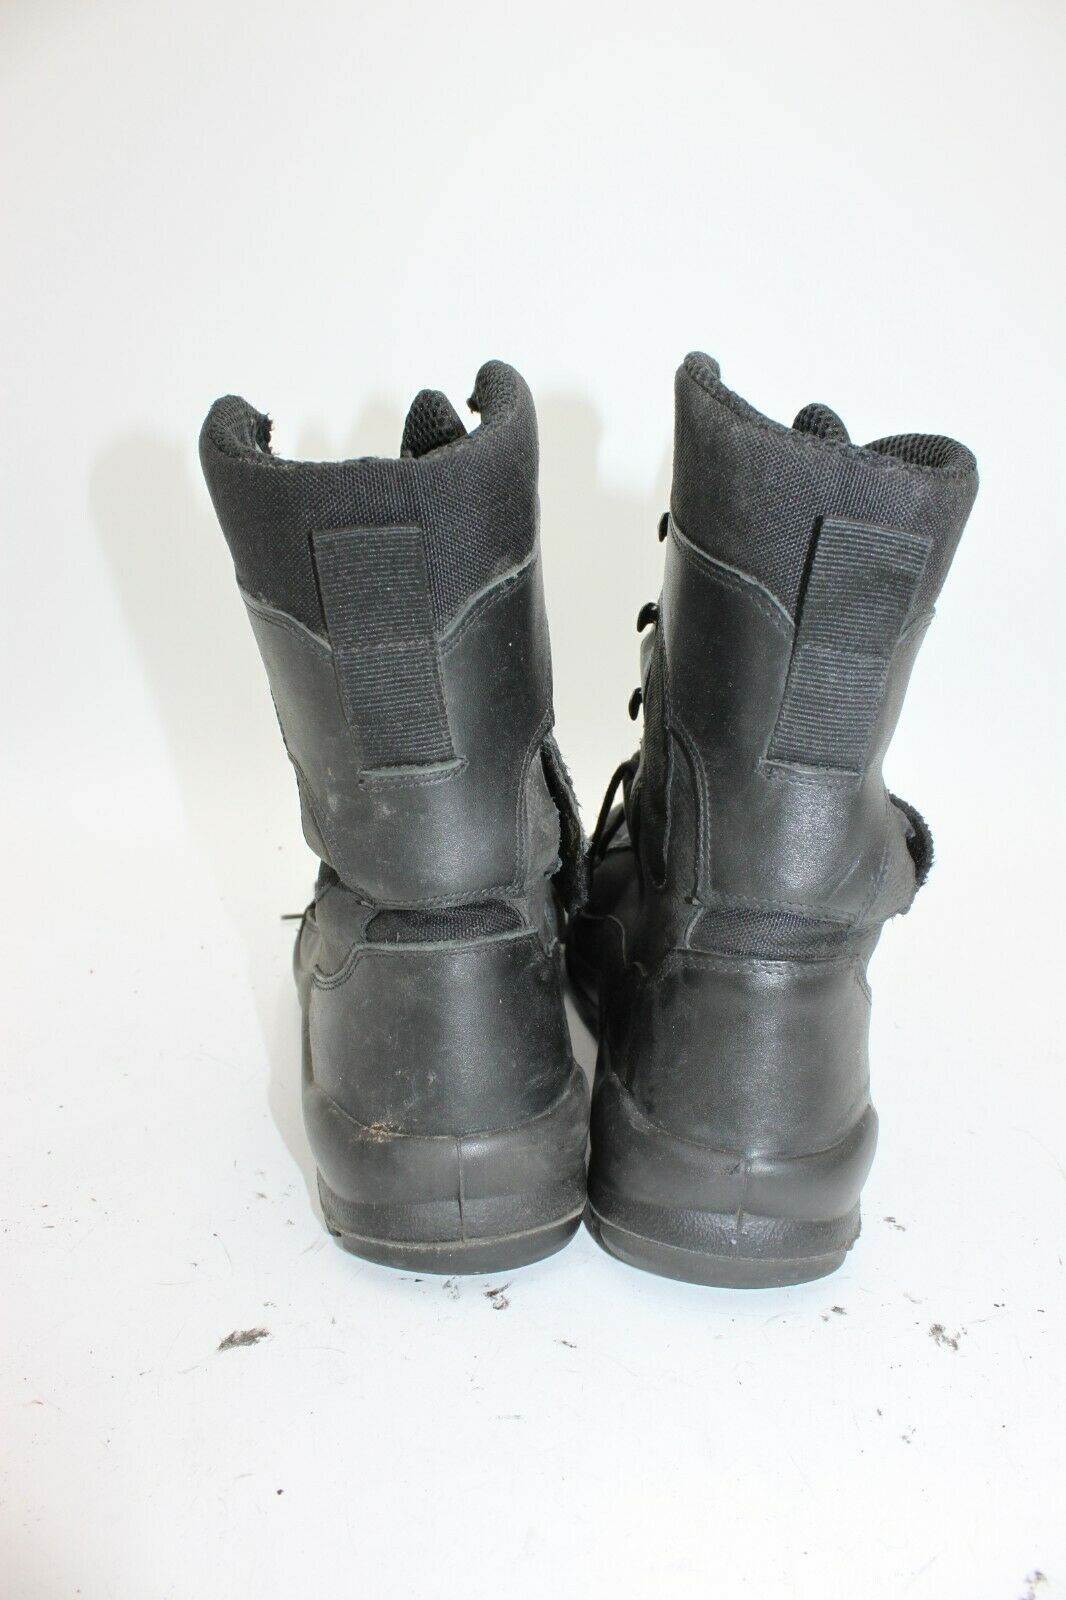 Austrian Military Jungle Combat Boots Stumpp & Baier Lightweight Used Size 9 US (ASB4642)